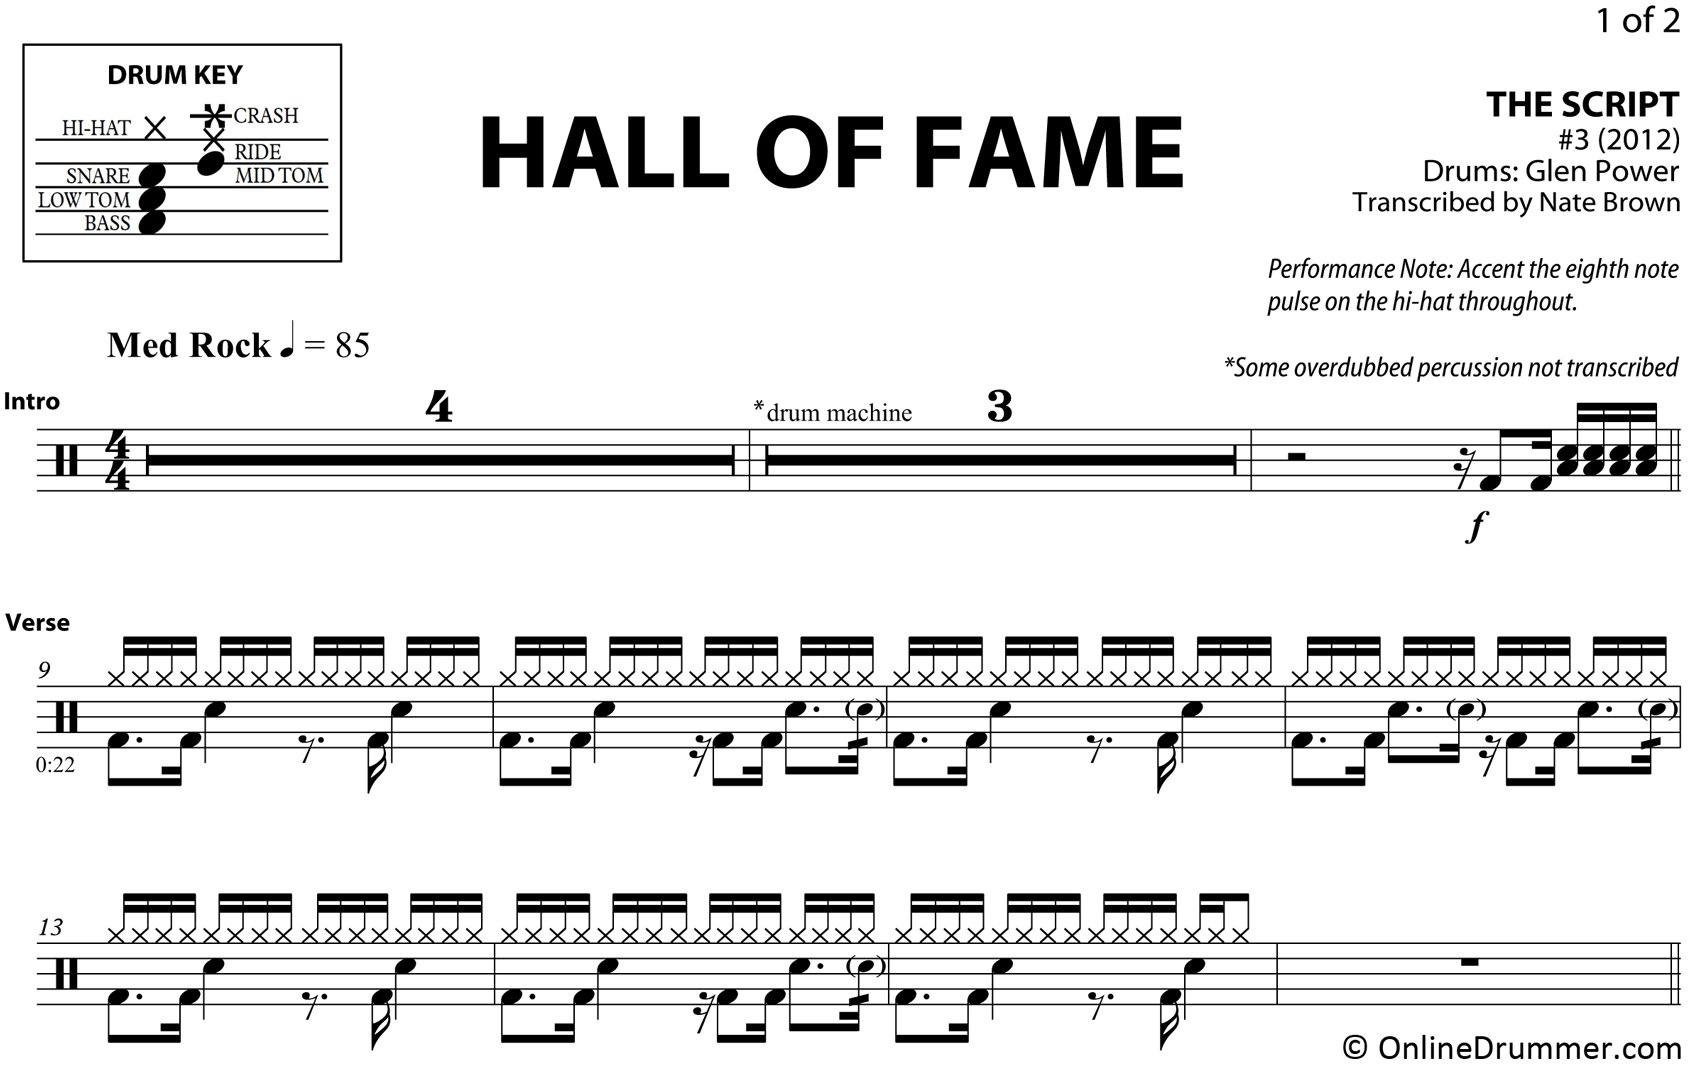 Hall of Fame - The Script - Drum Sheet Music